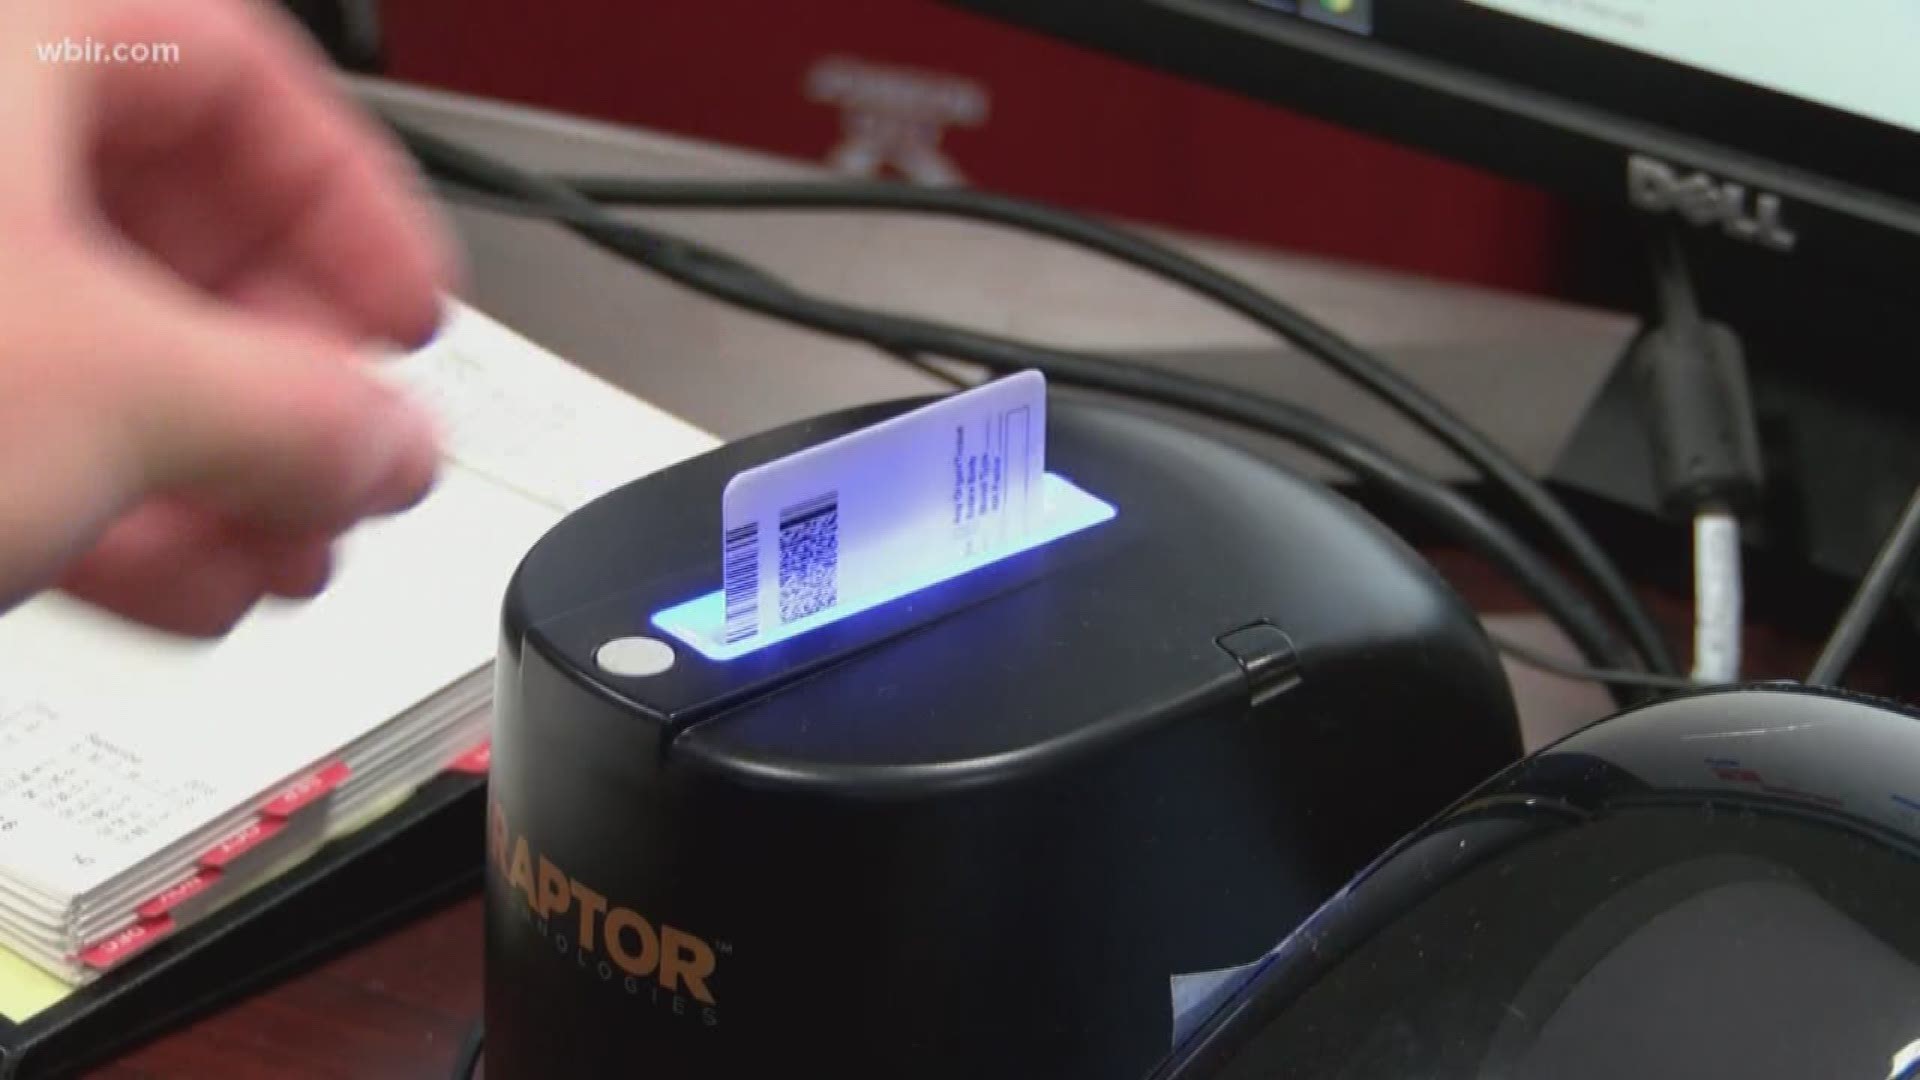 Officials say the Raptor program scans every visitor's drivers license, then compares that to a sex offender registry for all 50 states. It caught a registered sex offender in Johnson City. (WCYB)